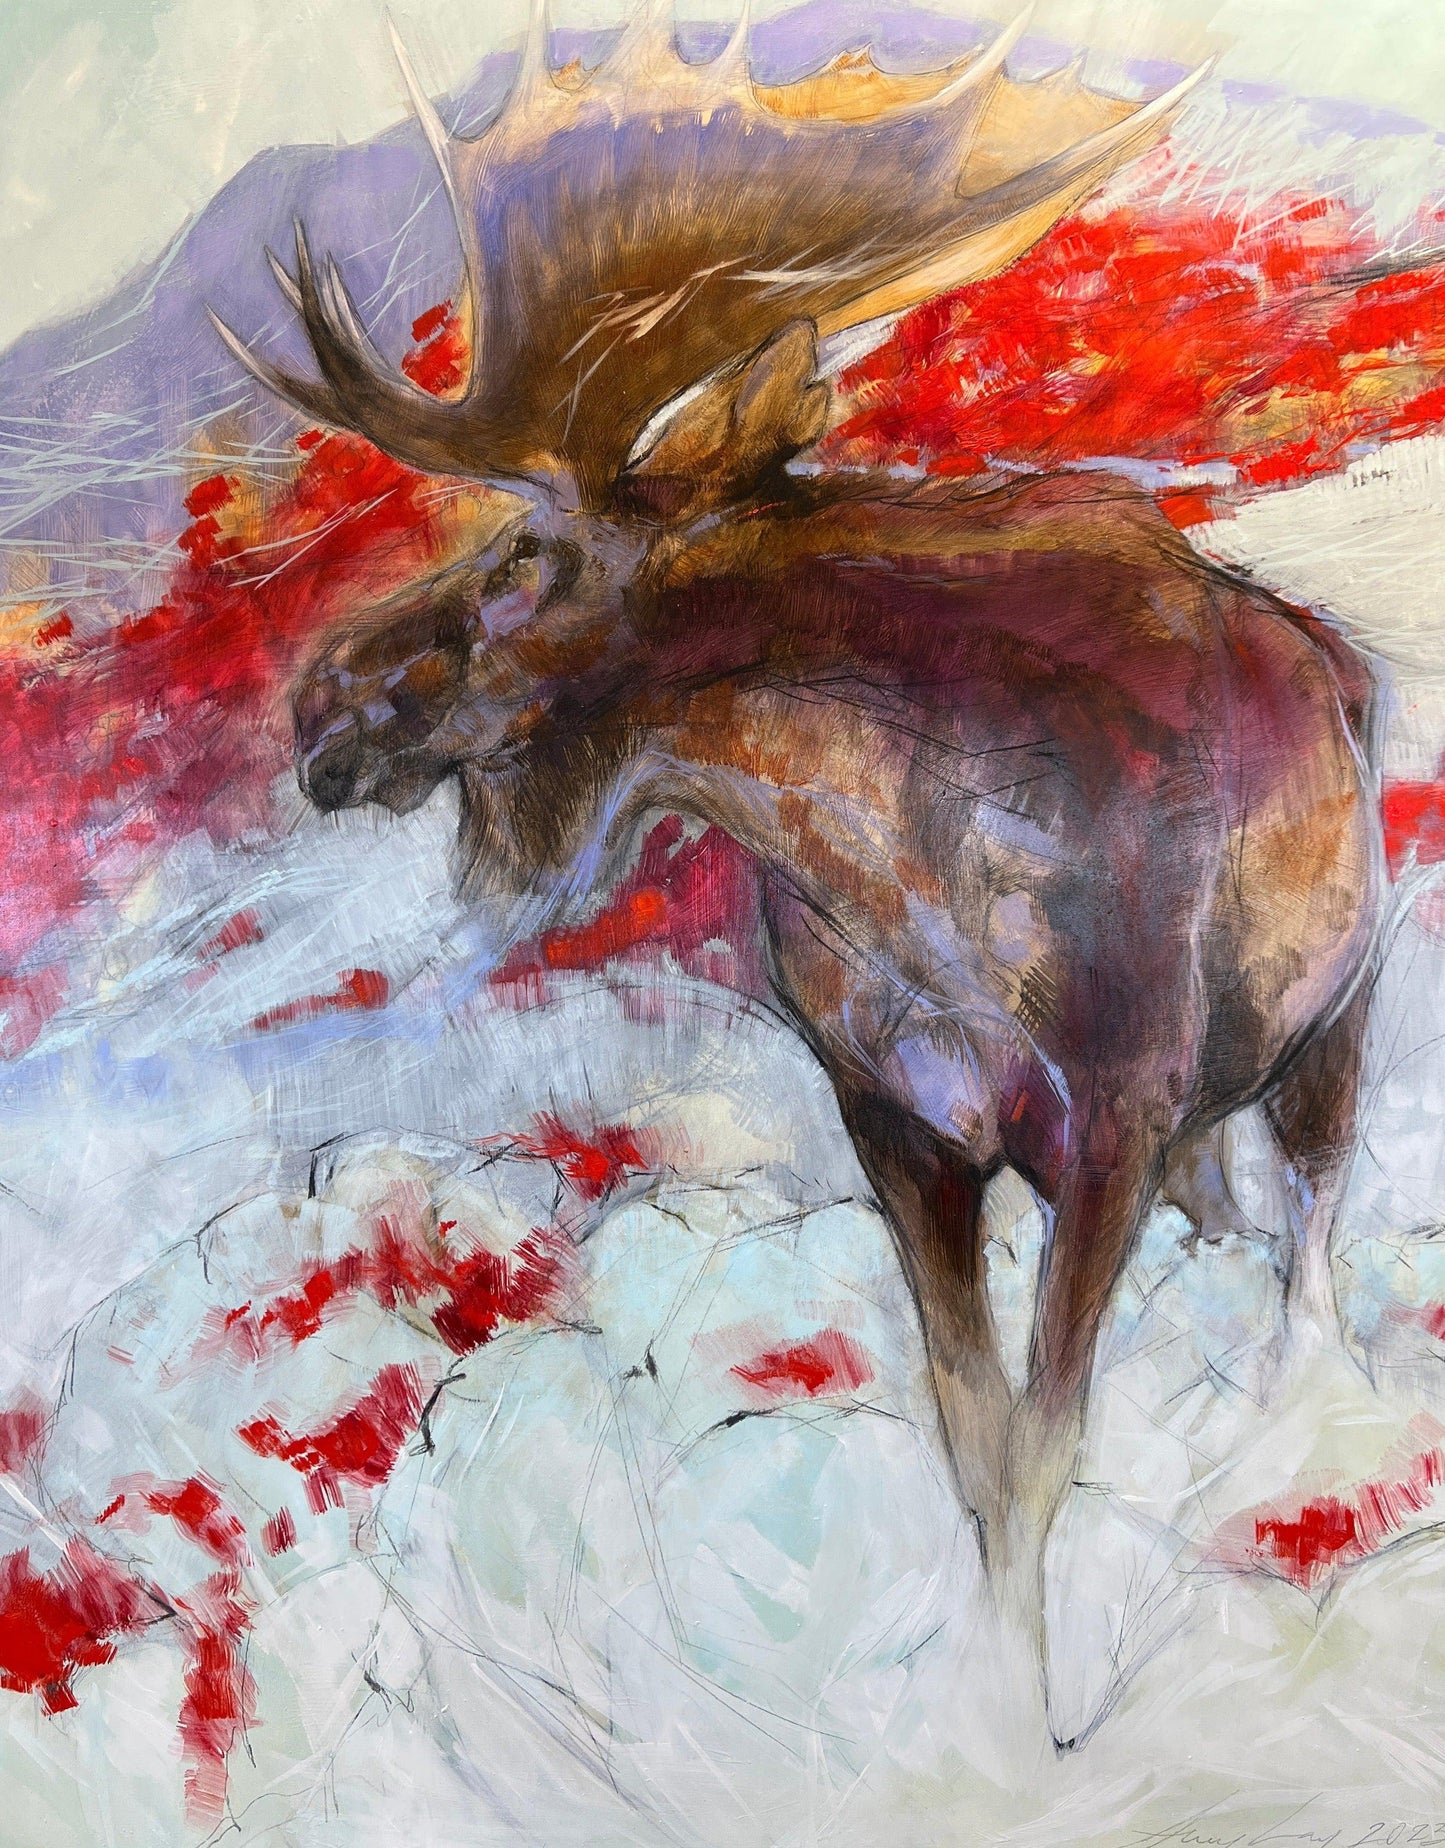 Scarlet Monarch-Painting-Amy Lay-Sorrel Sky Gallery